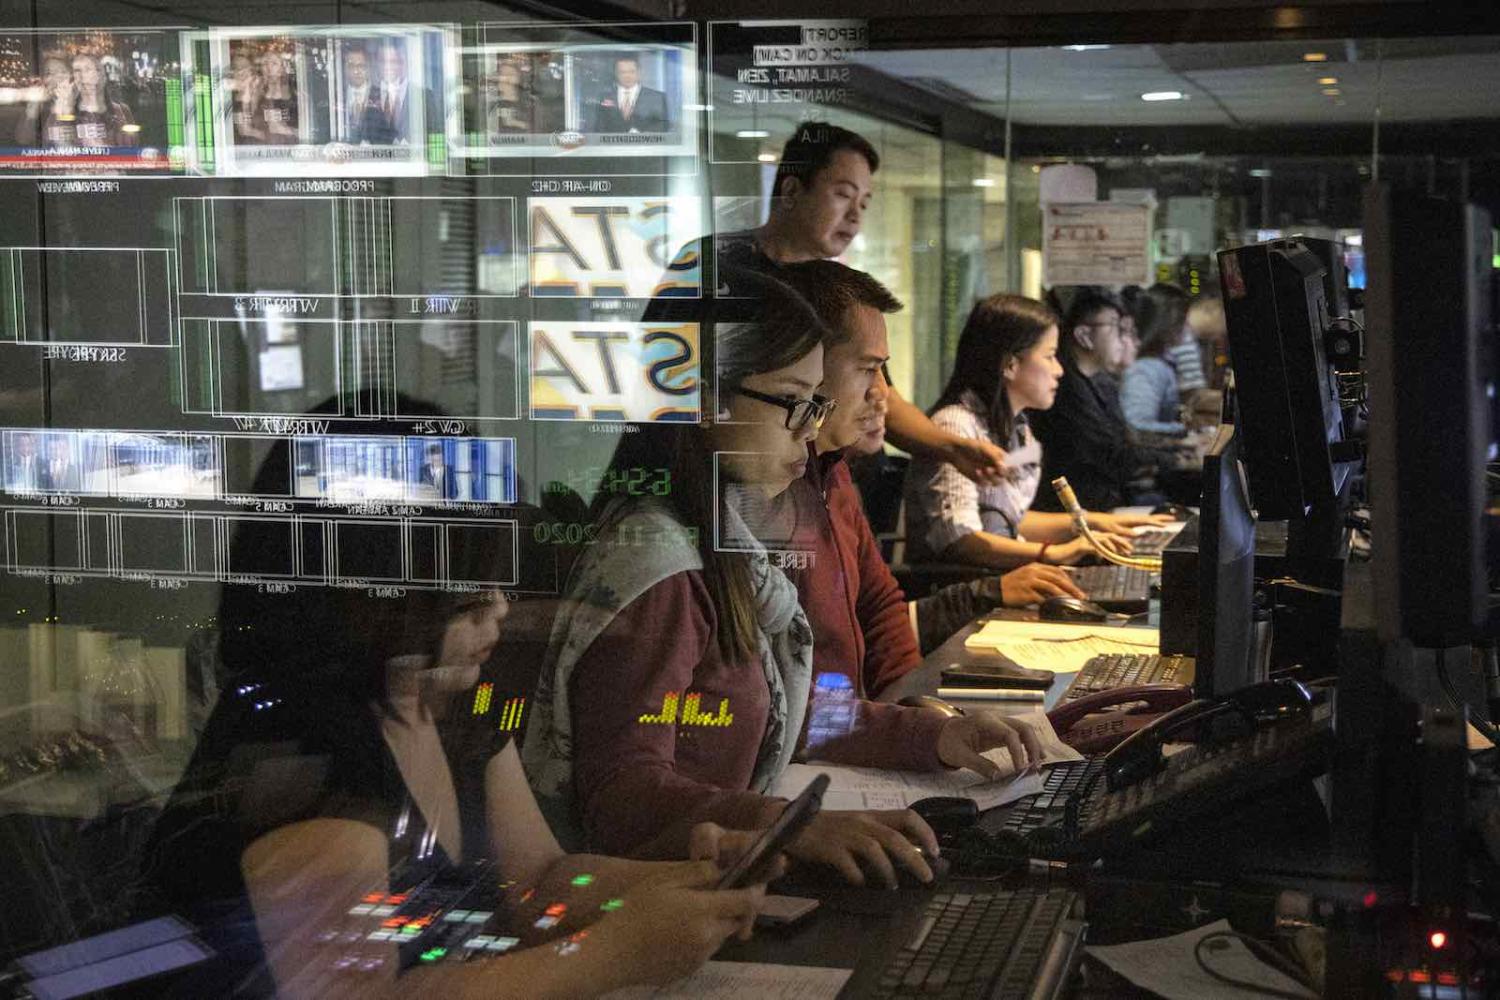 Inside the control room of ABS-CBN news program, “TV Patrol”, 11 February 2020 in Manila. The Philippine government last month moved to shut down ABS-CBN, the country's leading broadcast network (Ezra Acayan/Getty Images)